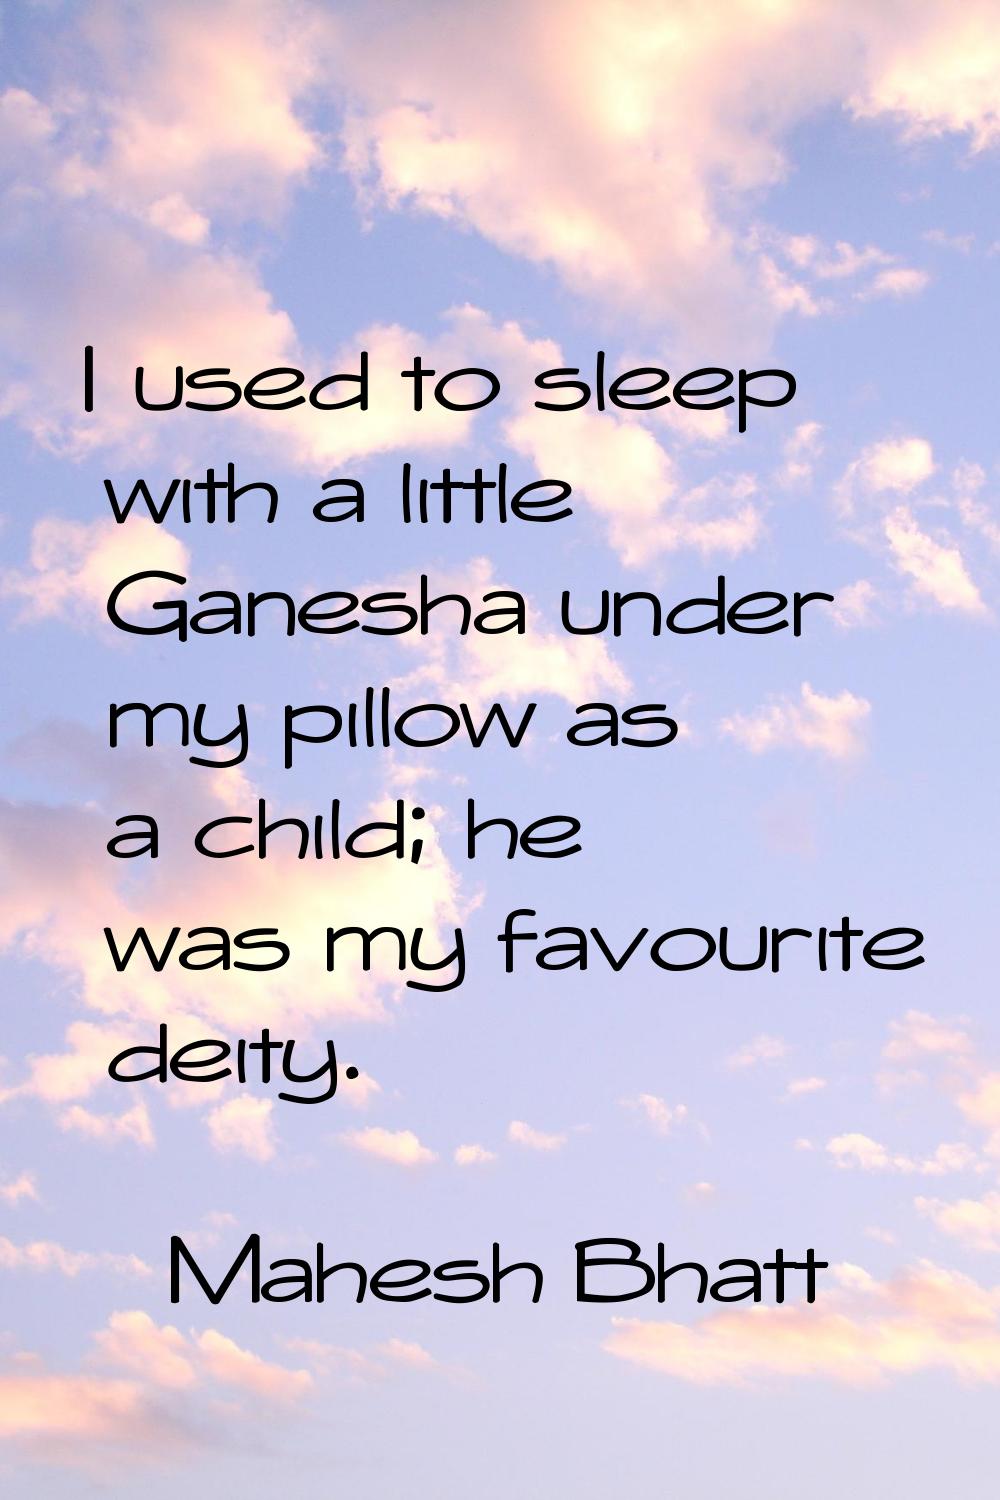 I used to sleep with a little Ganesha under my pillow as a child; he was my favourite deity.